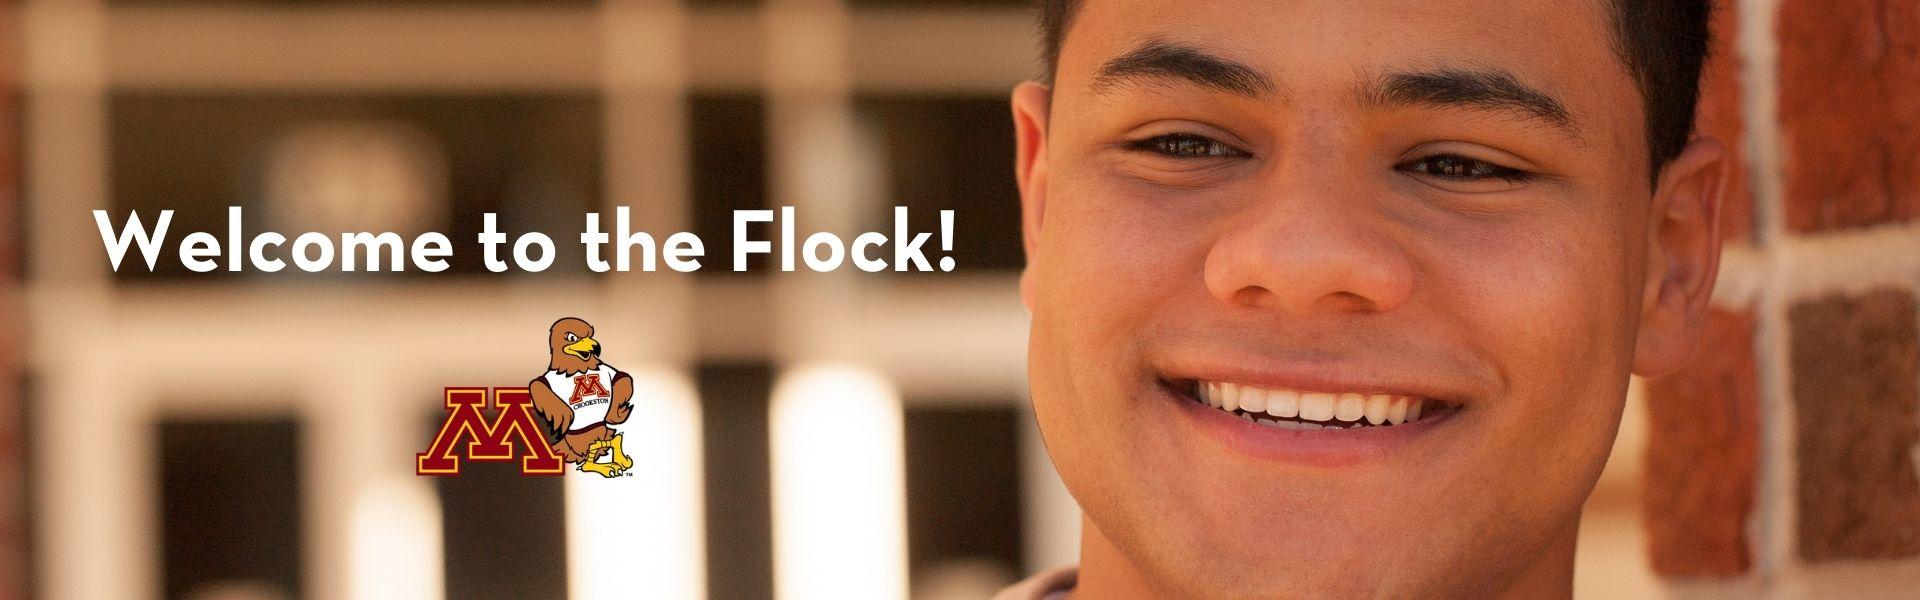 Happy male student with "Welcome to the Flock"